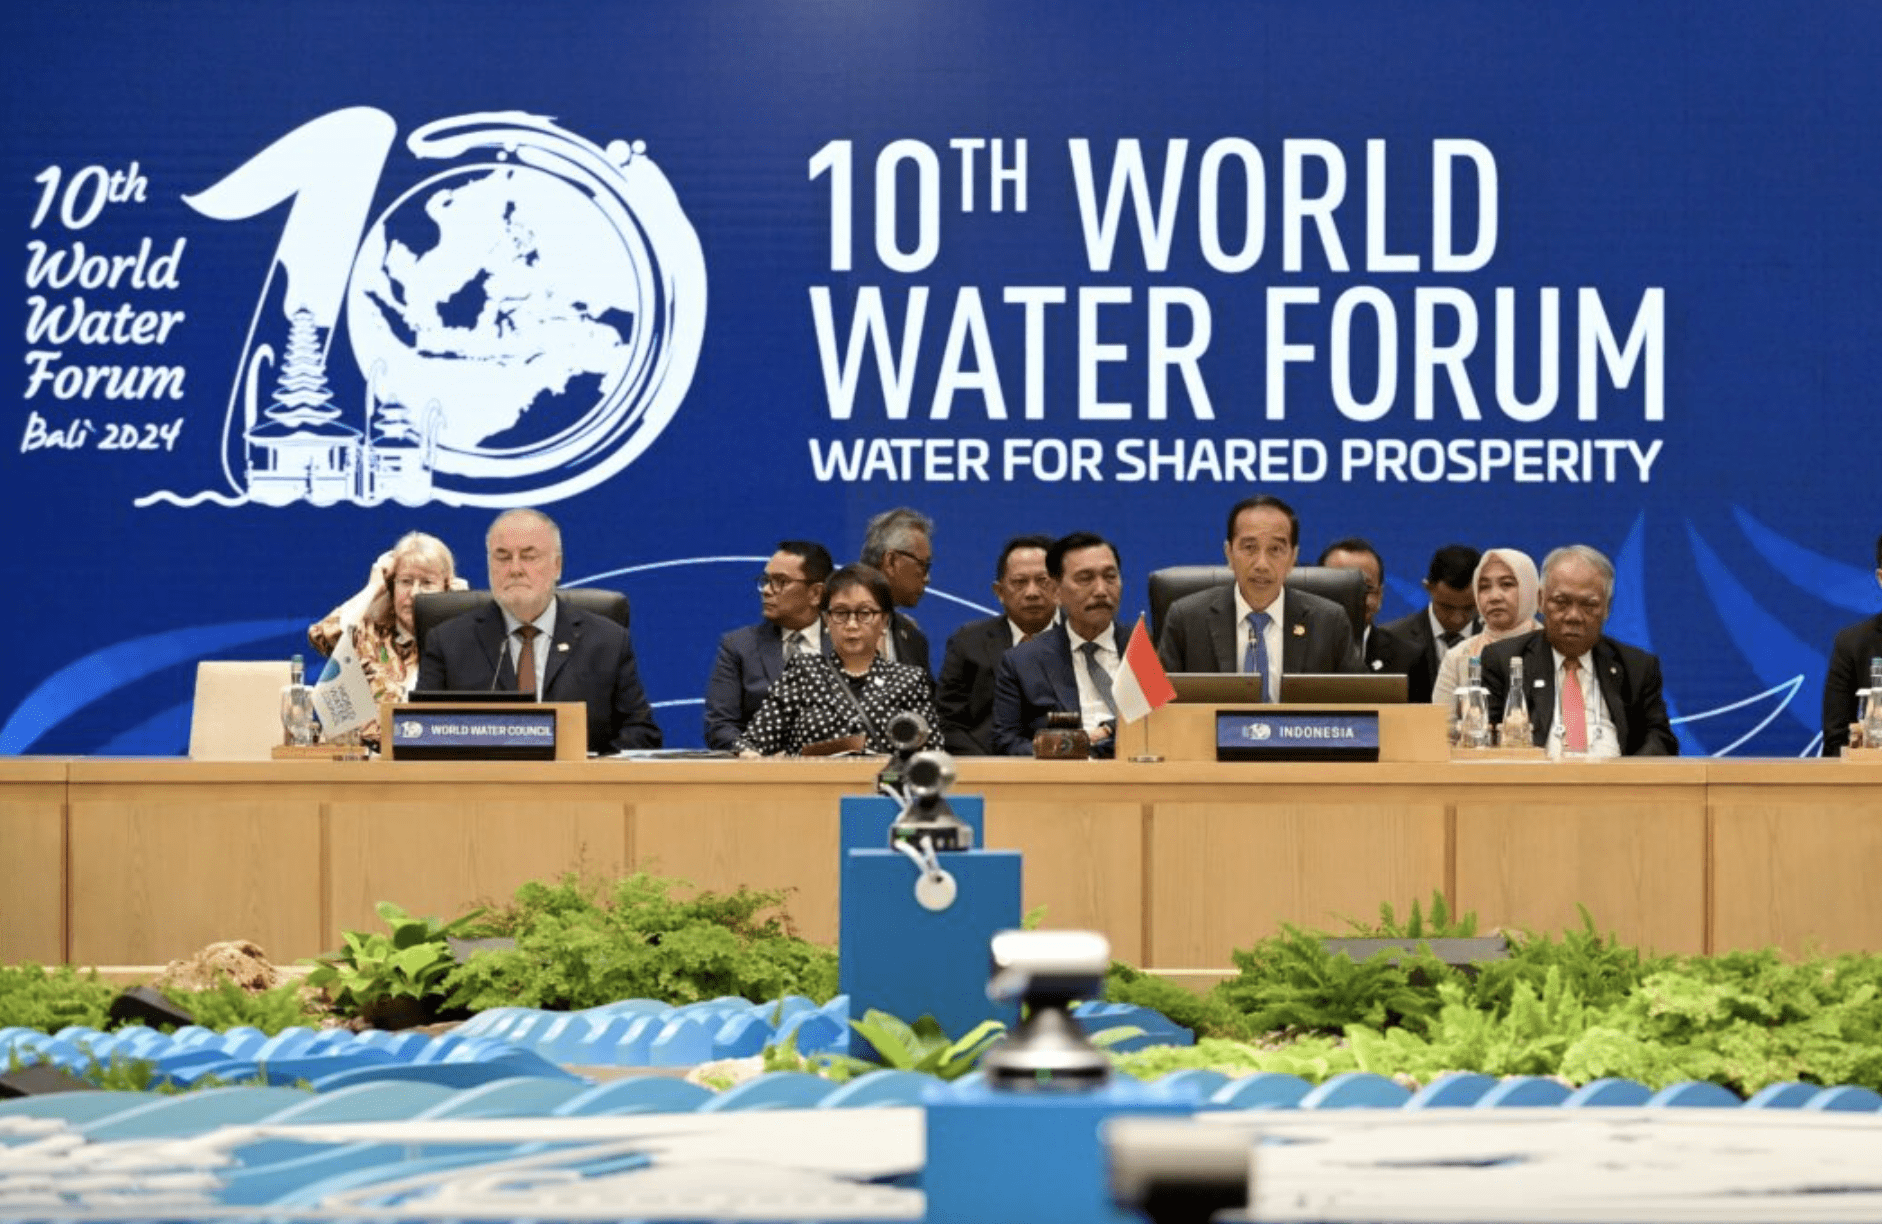 President Jokowi and Elon Musk to Headline 10th World Water Forum in Bali, Highlighting Global Collaboration and Mangrove Initiatives